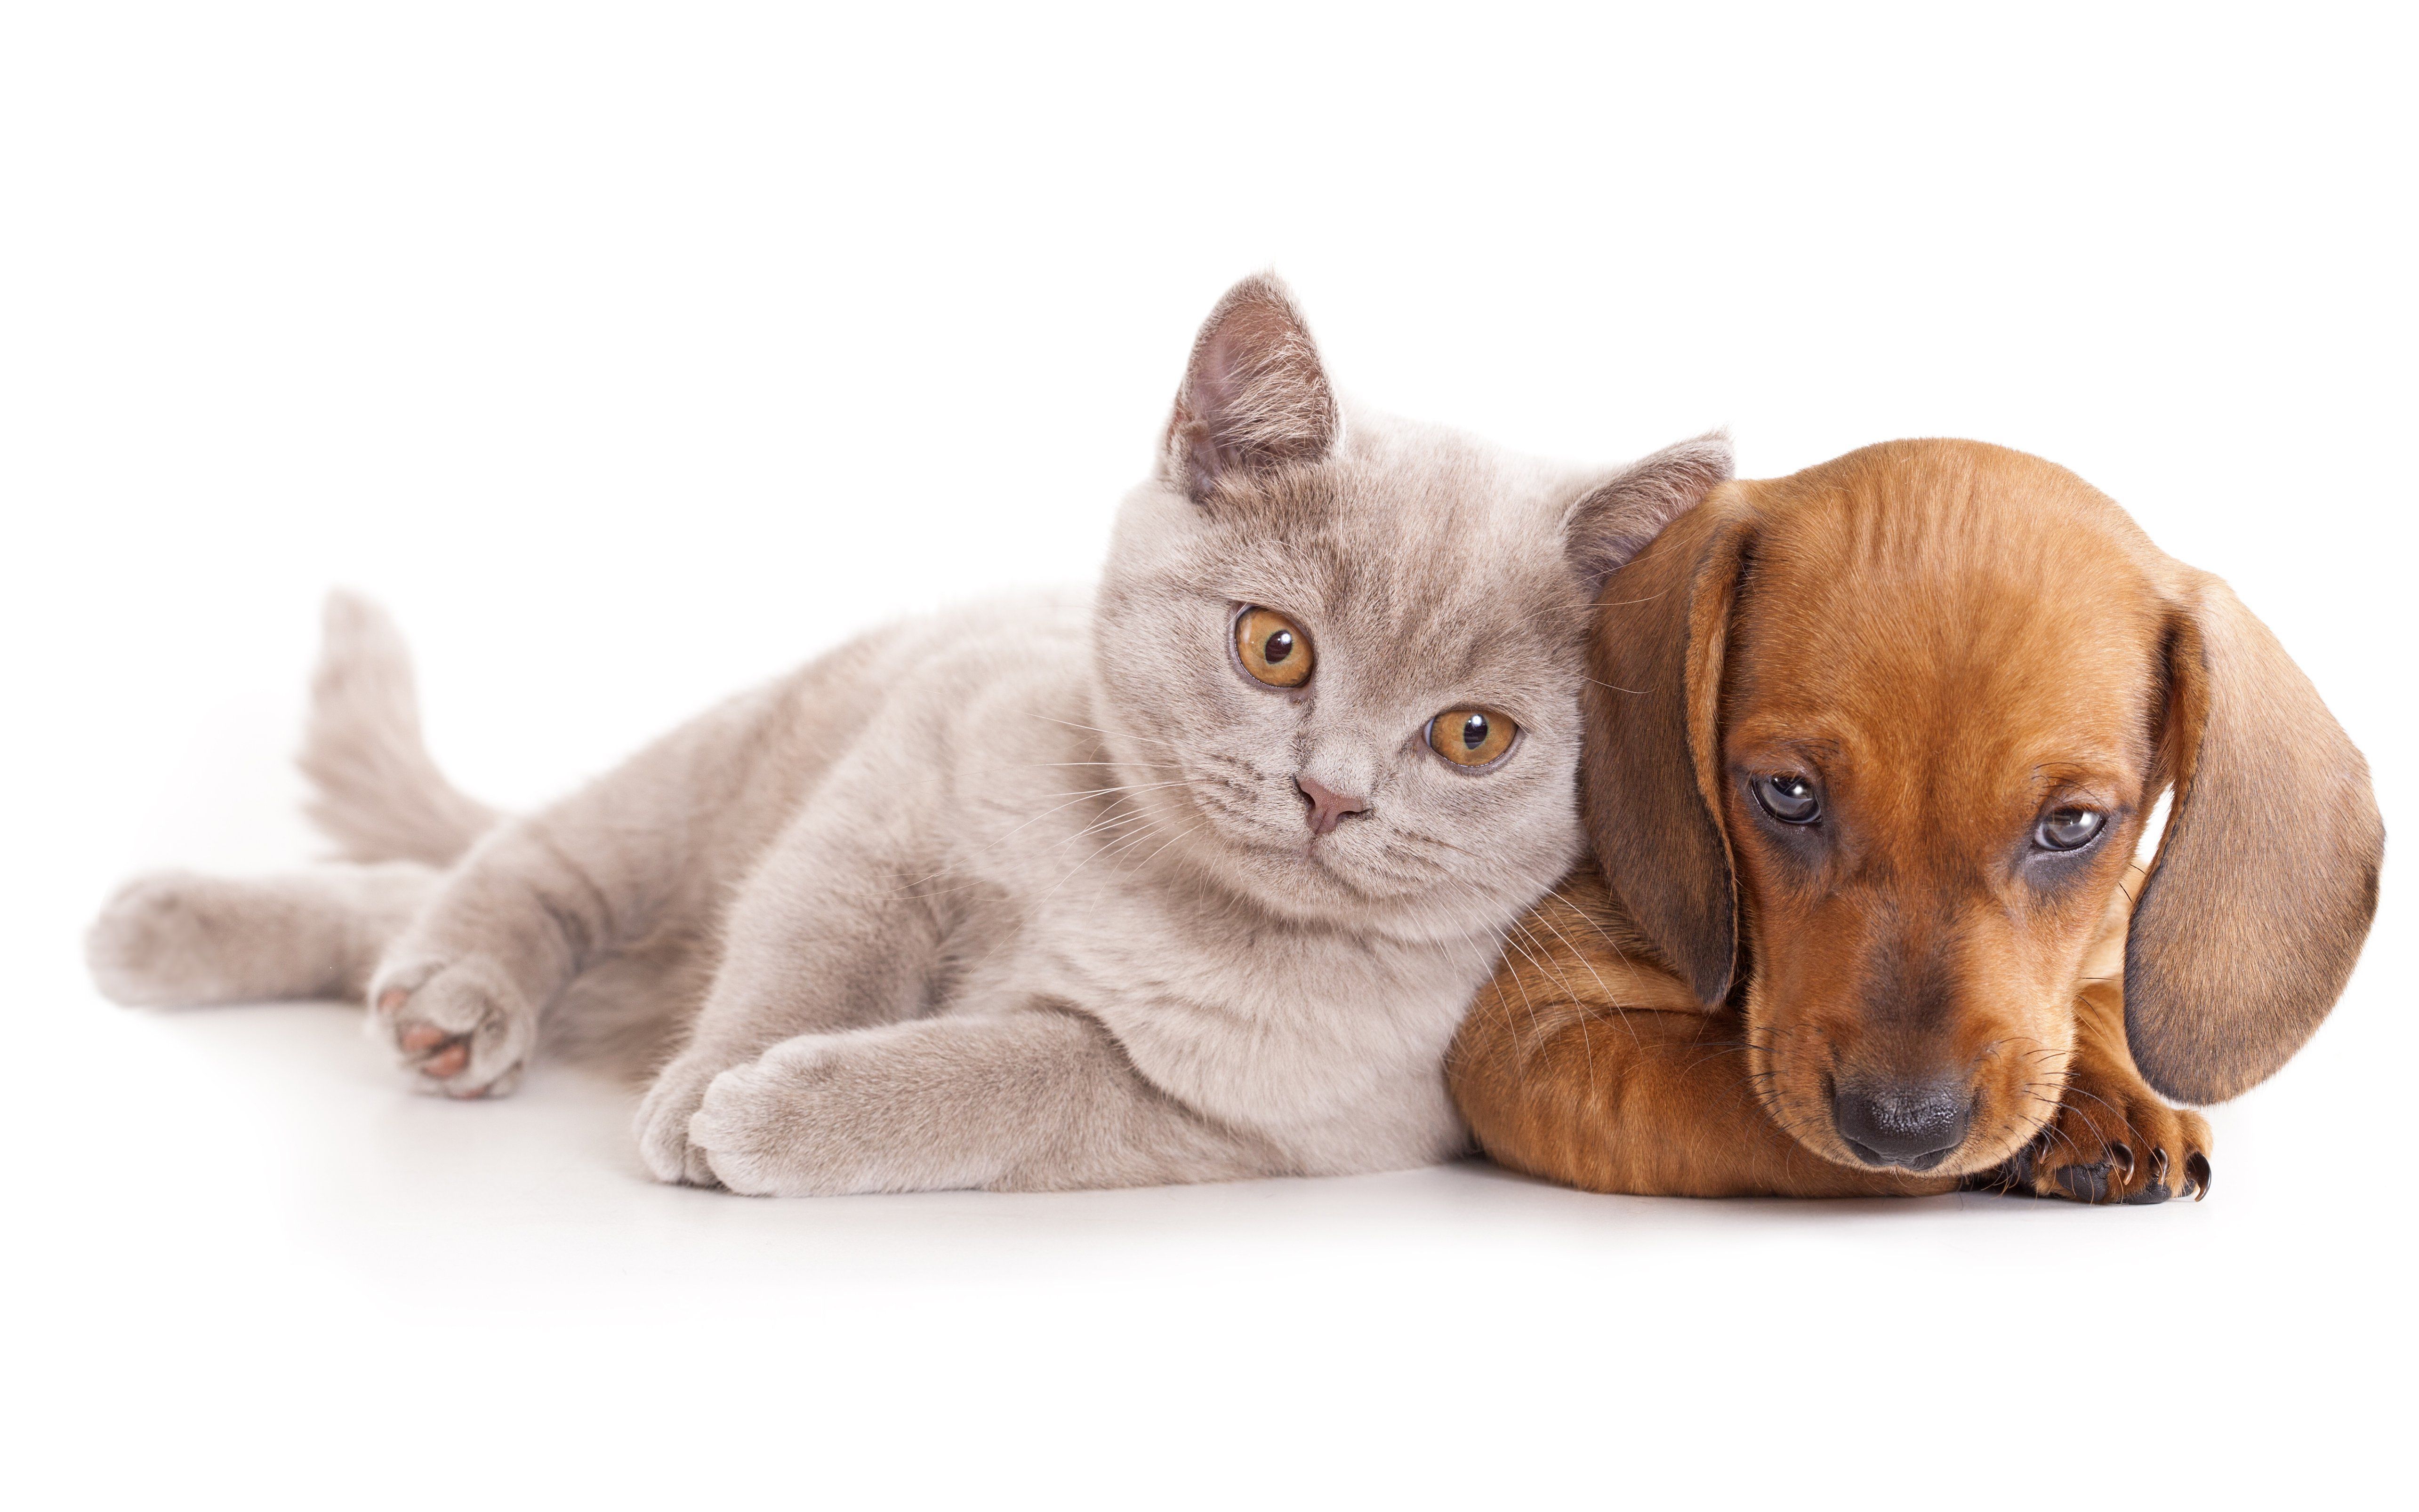 Cats Dogs Wallpapers Hd Cute Puppies Kittens On The - HD Wallpaper 